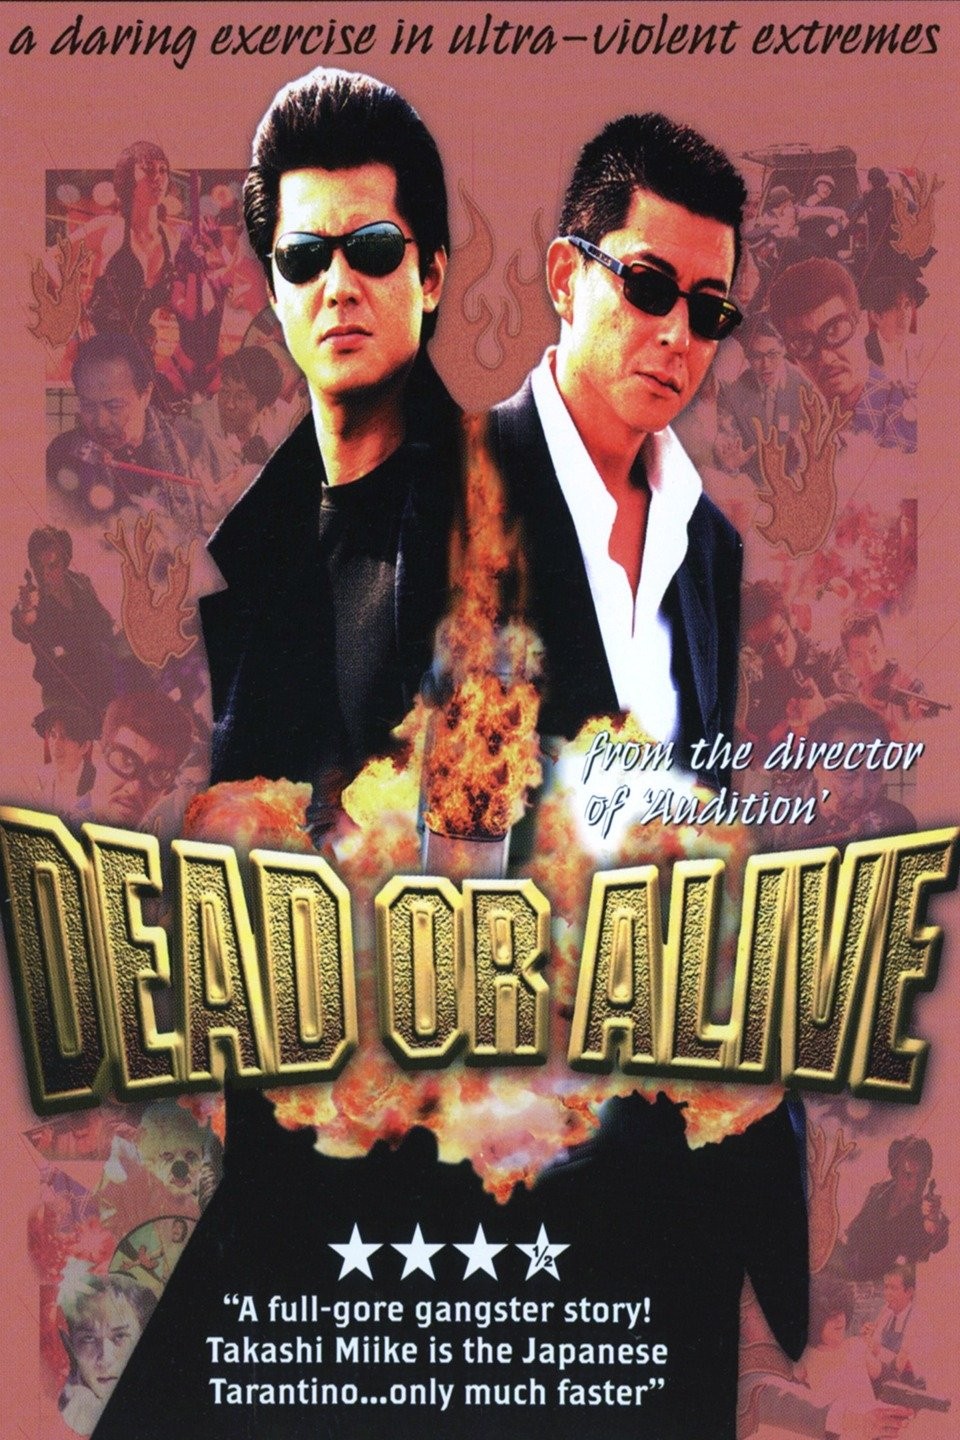 D.O.A.: Dead or Alive - Rotten Tomatoes